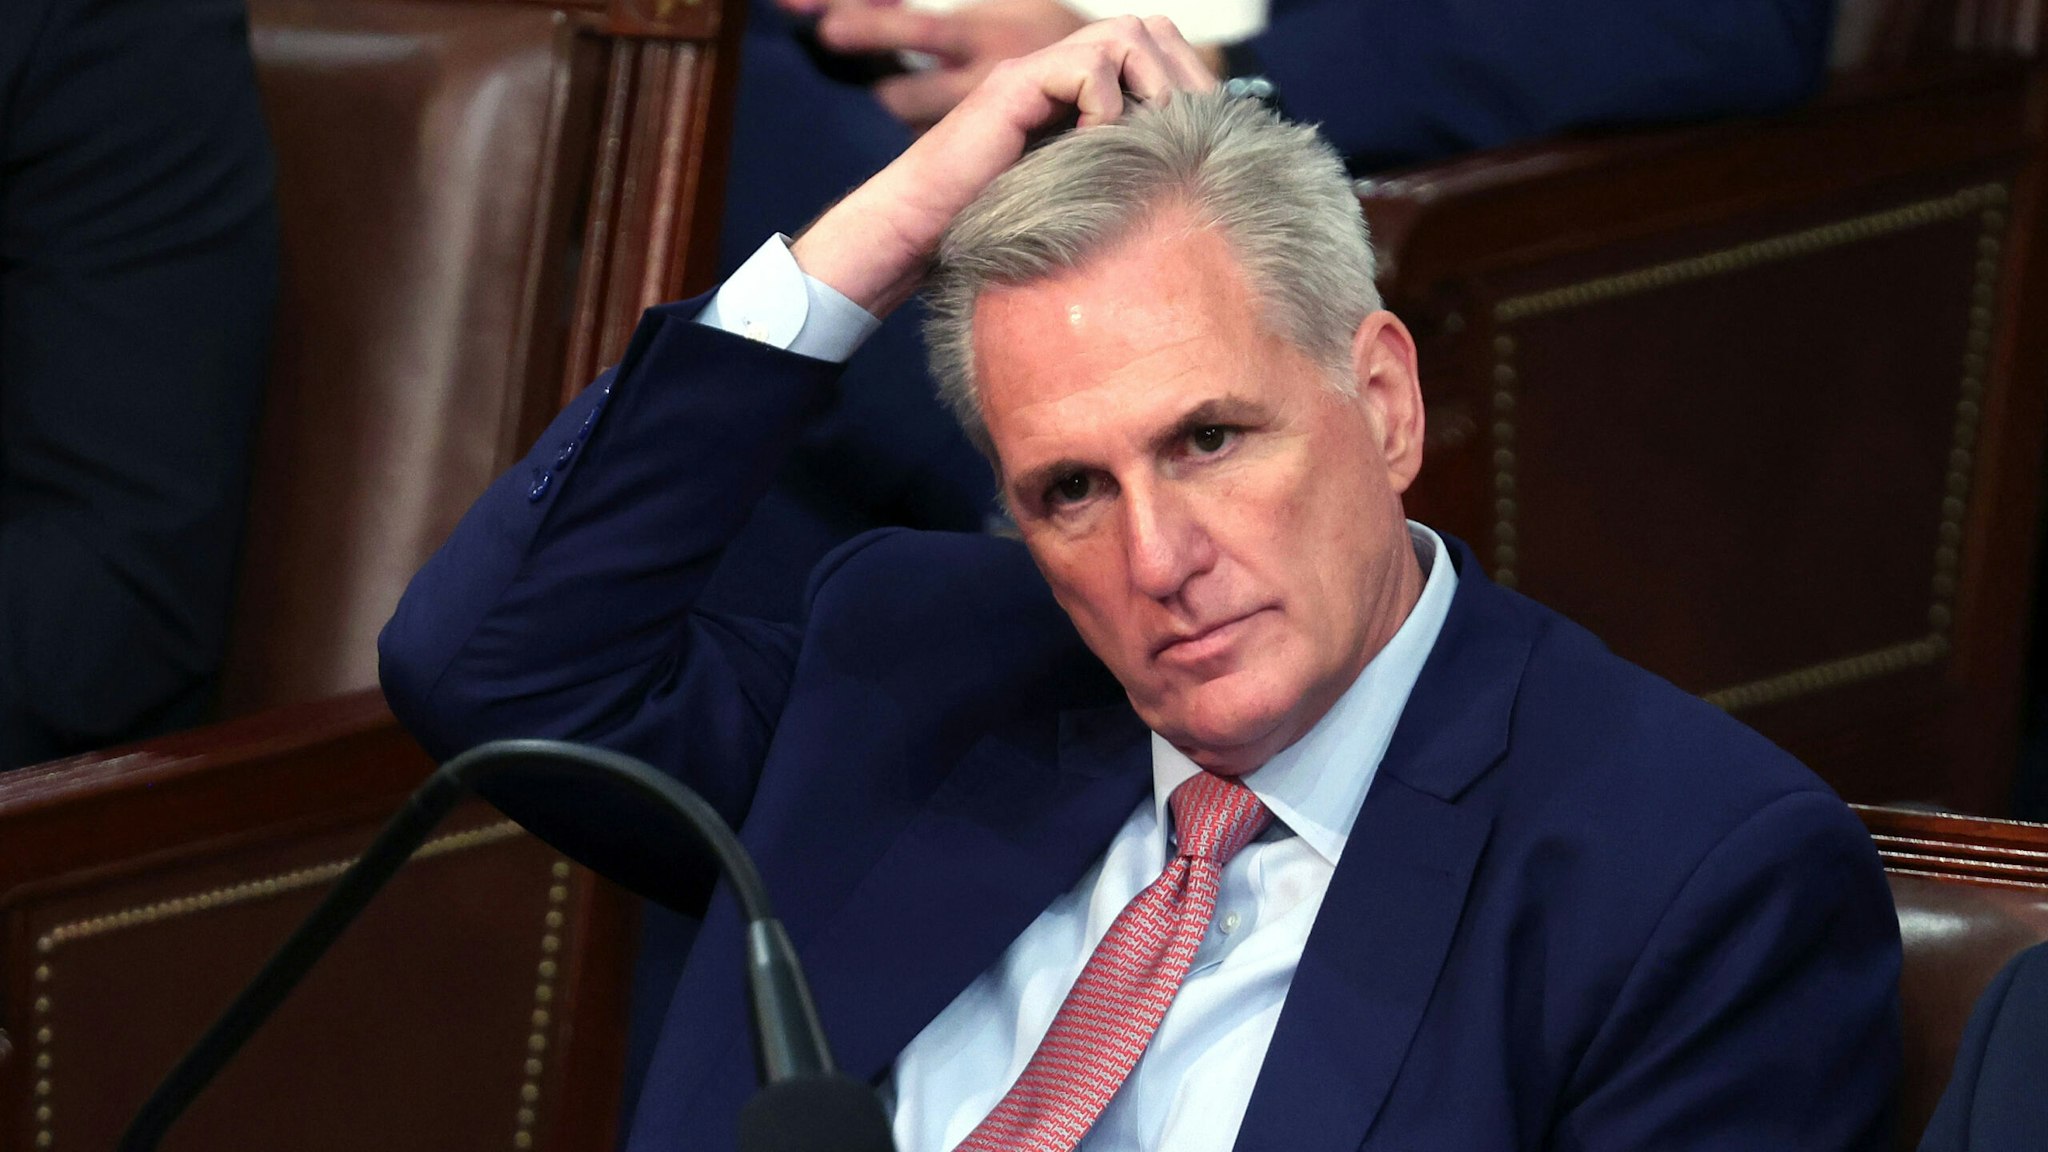 WASHINGTON, DC - JANUARY 03: U.S. House Minority Leader Kevin McCarthy (R-CA) reacts as Representatives cast their votes for Speaker of the House on the first day of the 118th Congress in the House Chamber of the U.S. Capitol Building on January 03, 2023 in Washington, DC. Today members of the 118th Congress will be sworn-in and the House of Representatives will elect a new Speaker of the House.